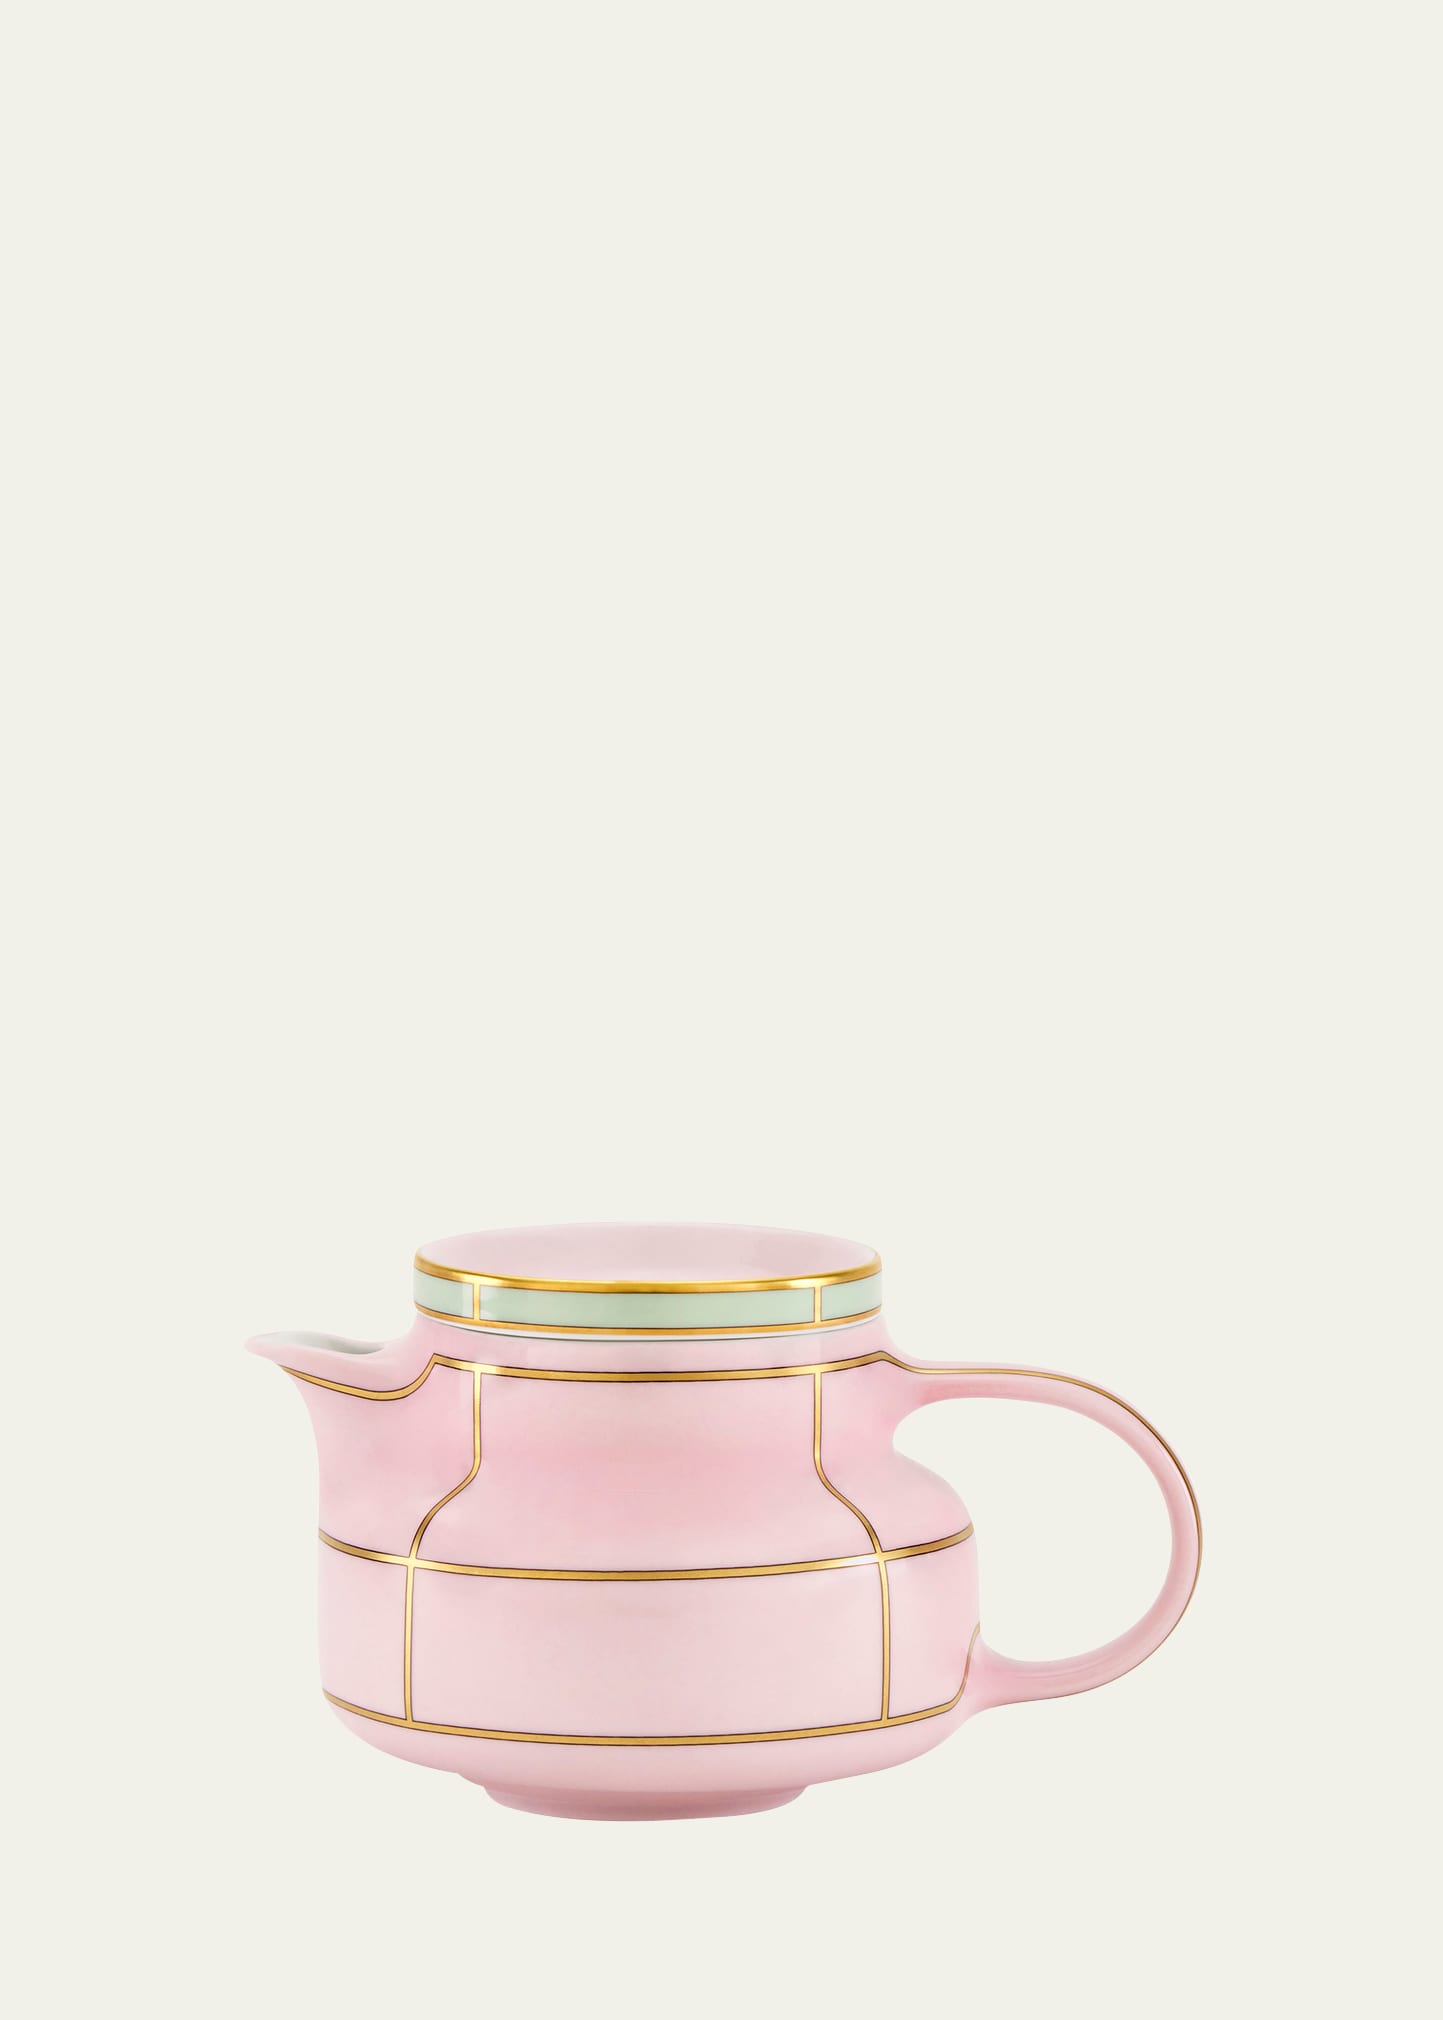 Diva Teapot with Cover, Rosa